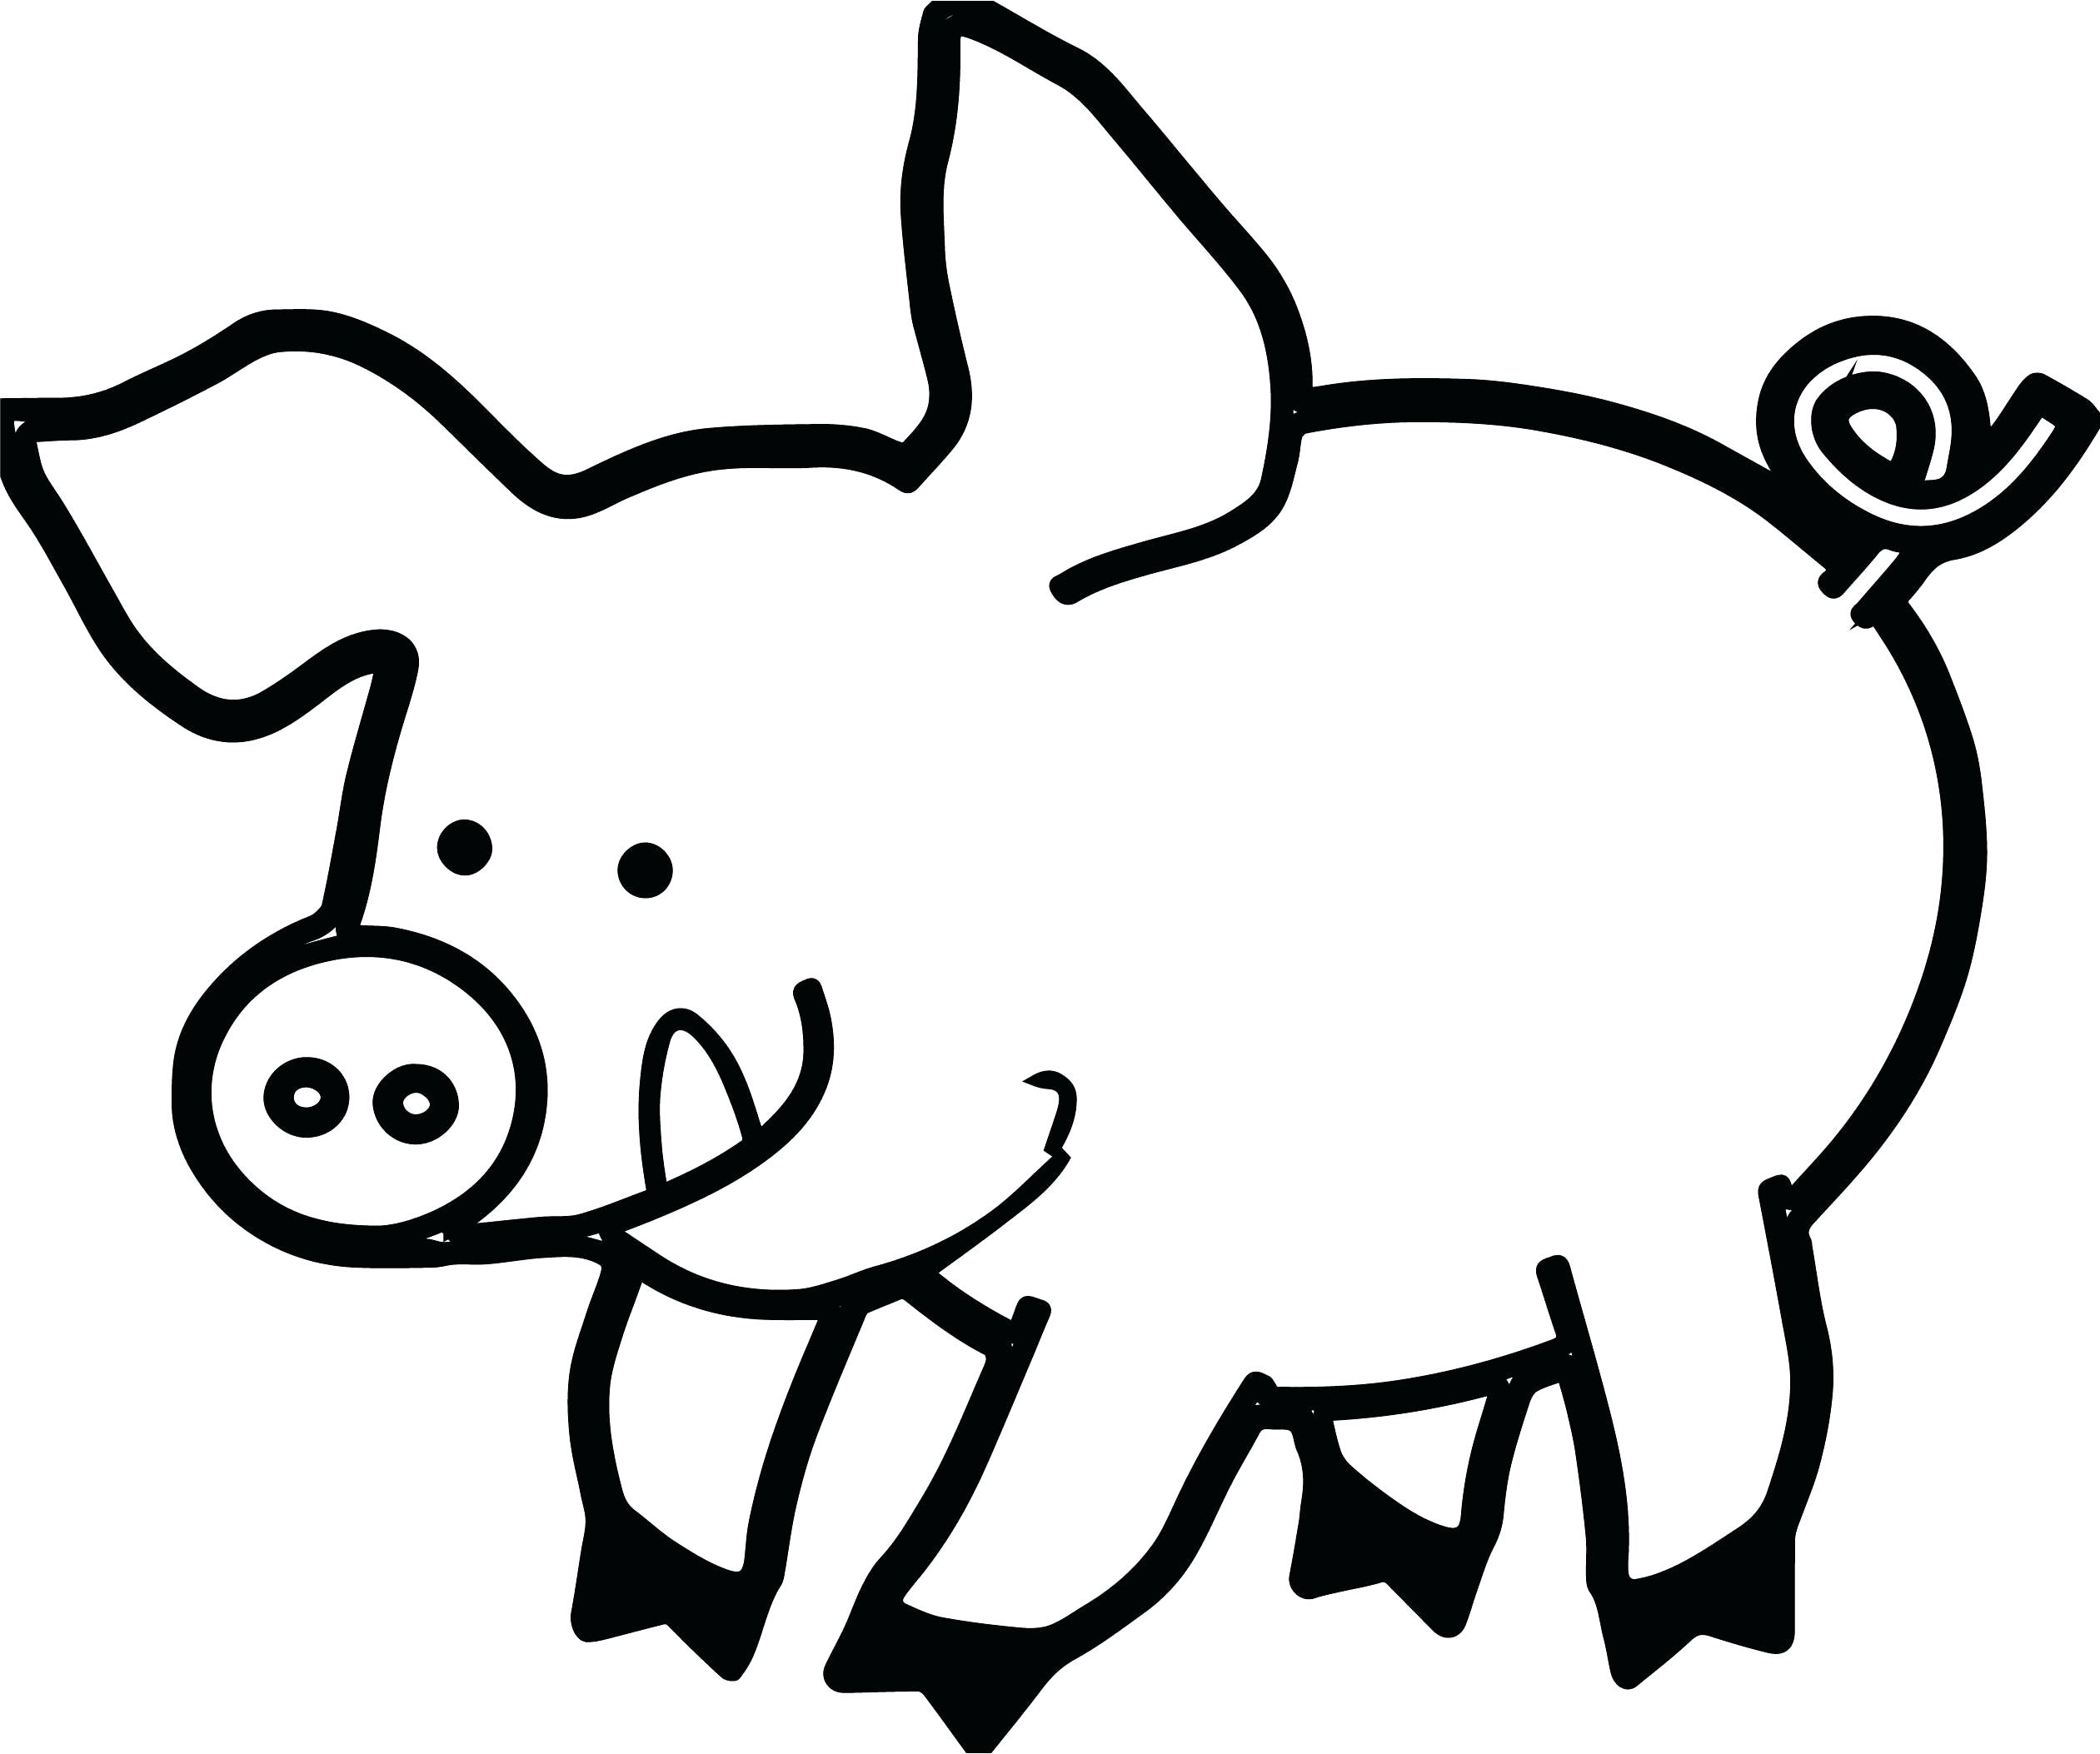 Hog clipart drawing. Pig face black and